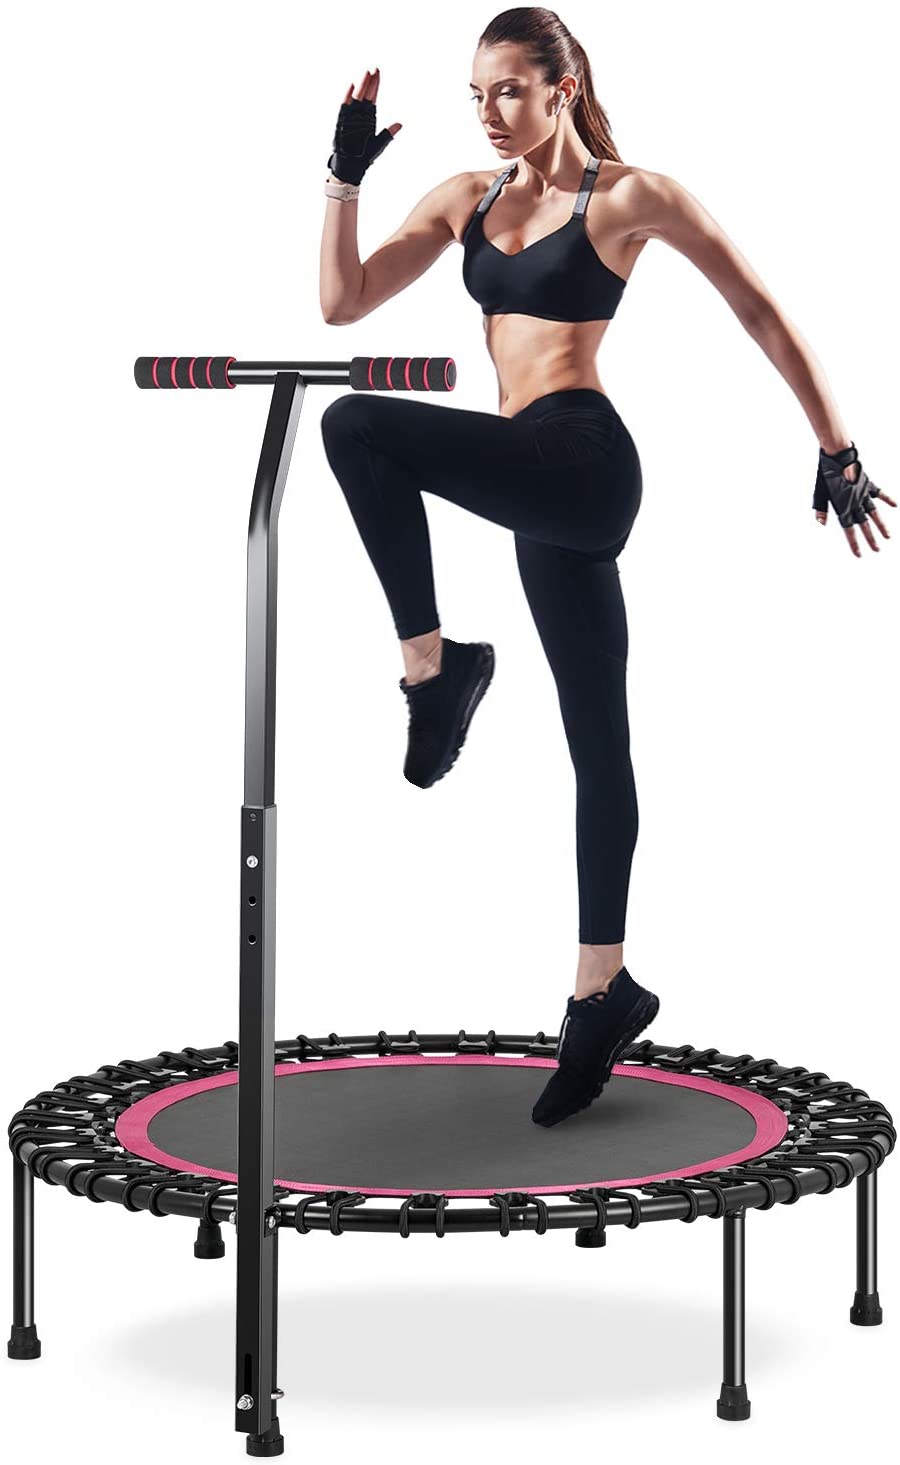 HOMEOW Fitness Trampoline for Adults 40" / 50" 440/550 lbs Mini Trampoline Bungee Rebounder with Adjustable Handle Silent Personal Workout Indoor/Garden Heavy Duty Quiet Exercise Training